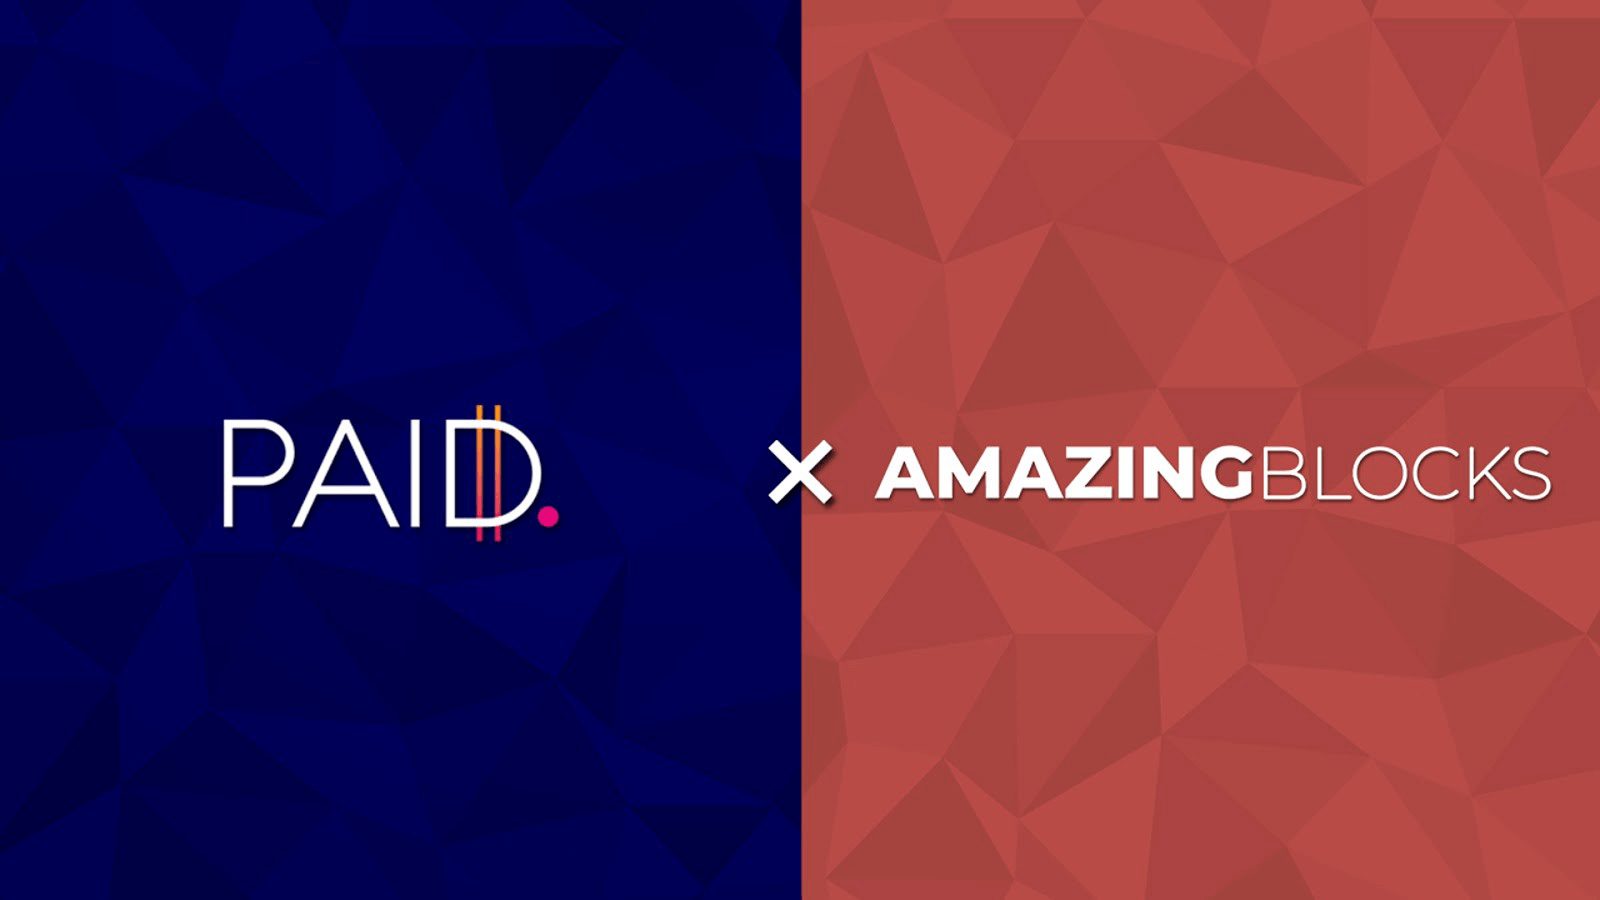 Paid Network Partners with Amazing Blocks